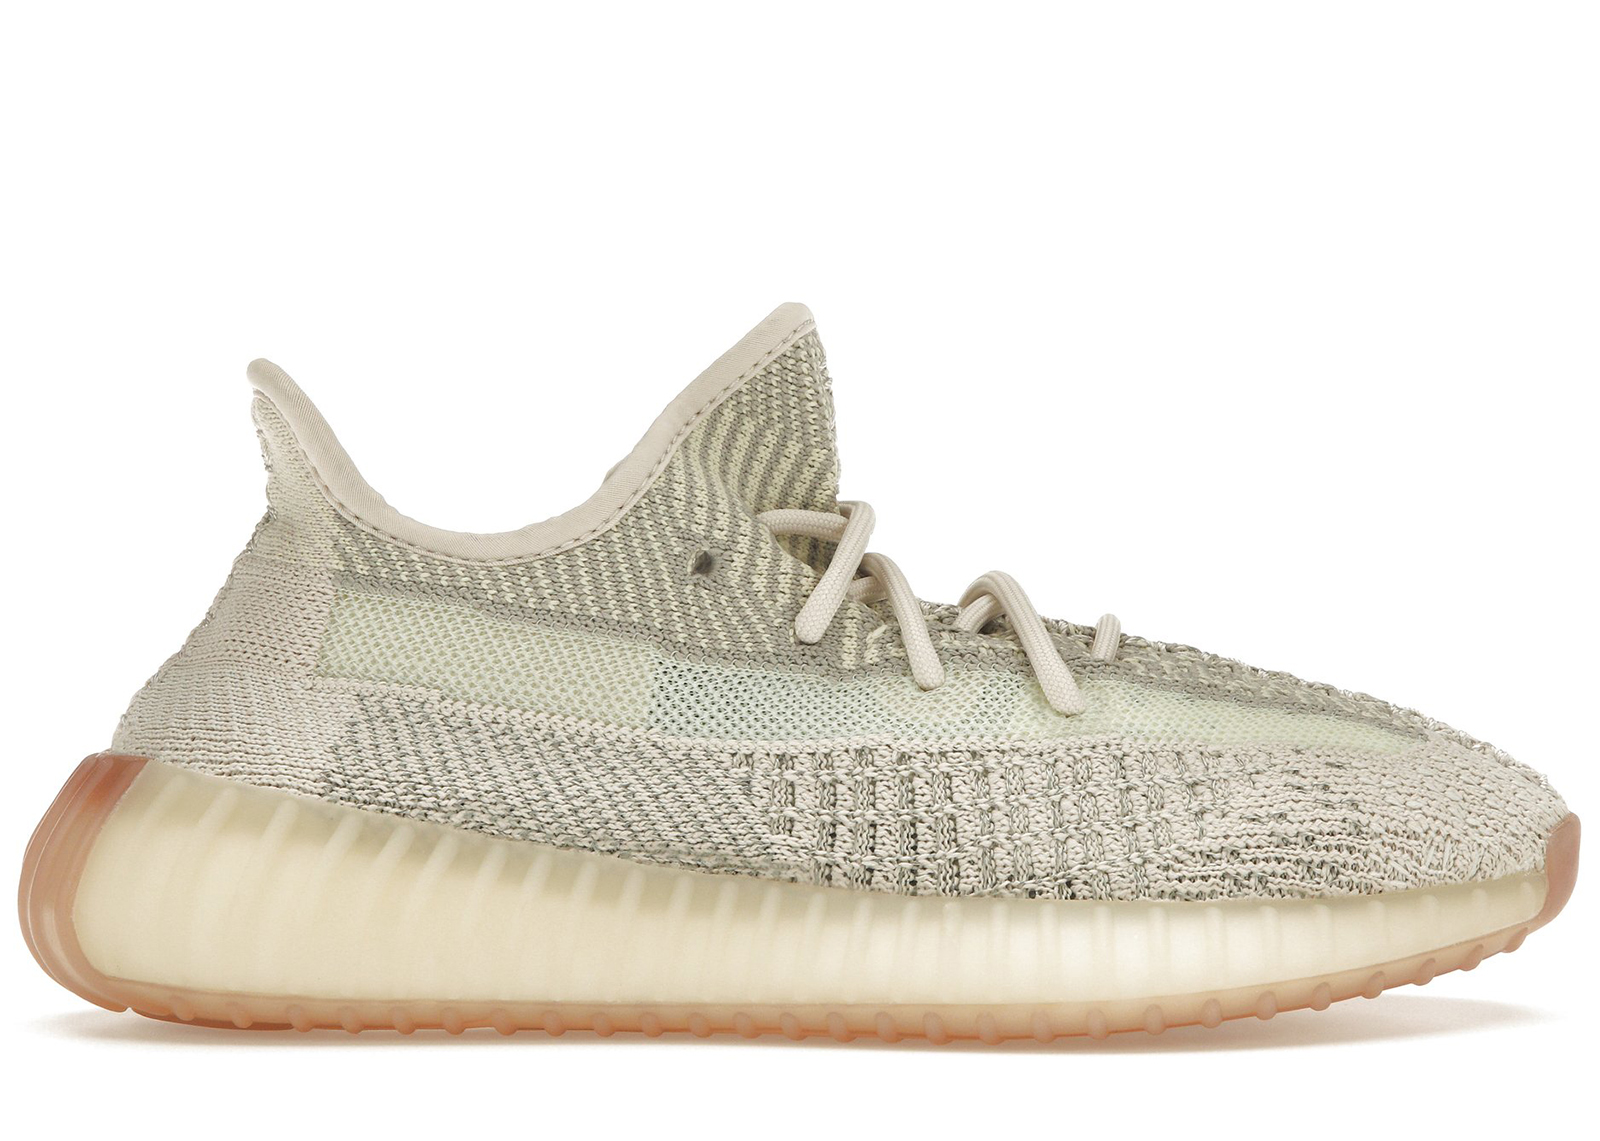 adidas Yeezy Boost 350 V2 Cloud White (Reflective) Men's - FW5317 - US